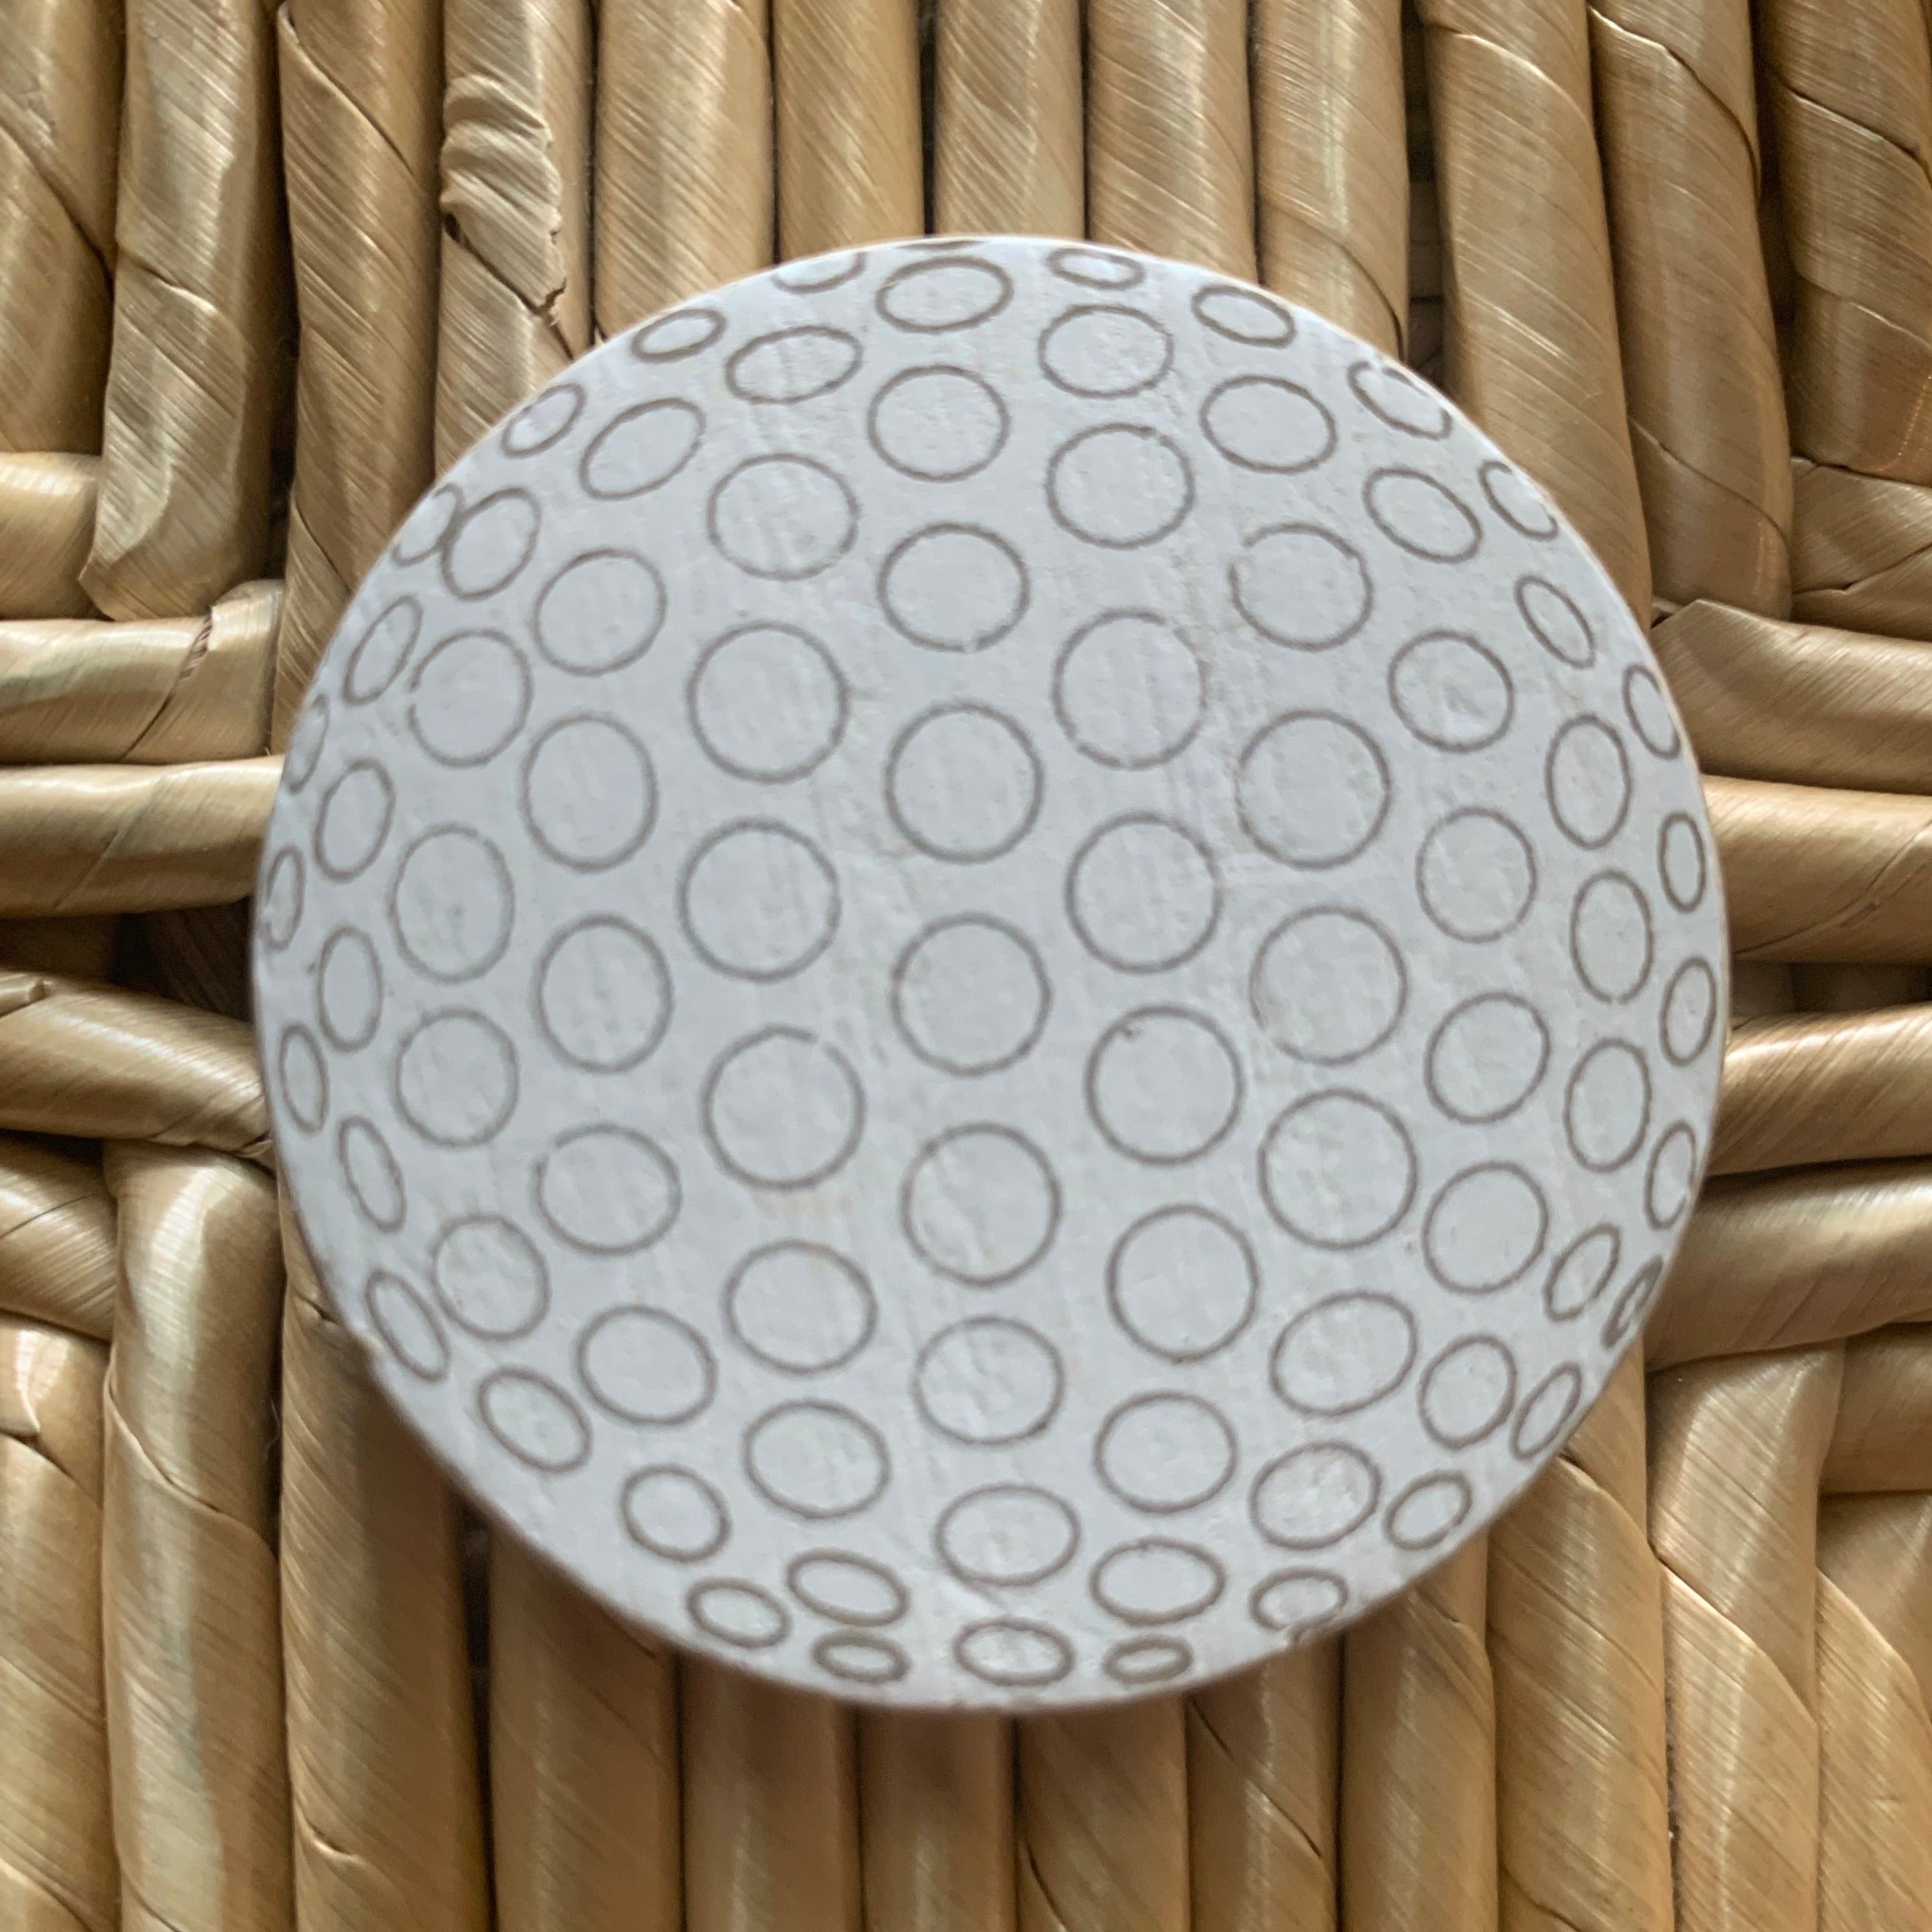 golfball adams wood tile shape for letterboard